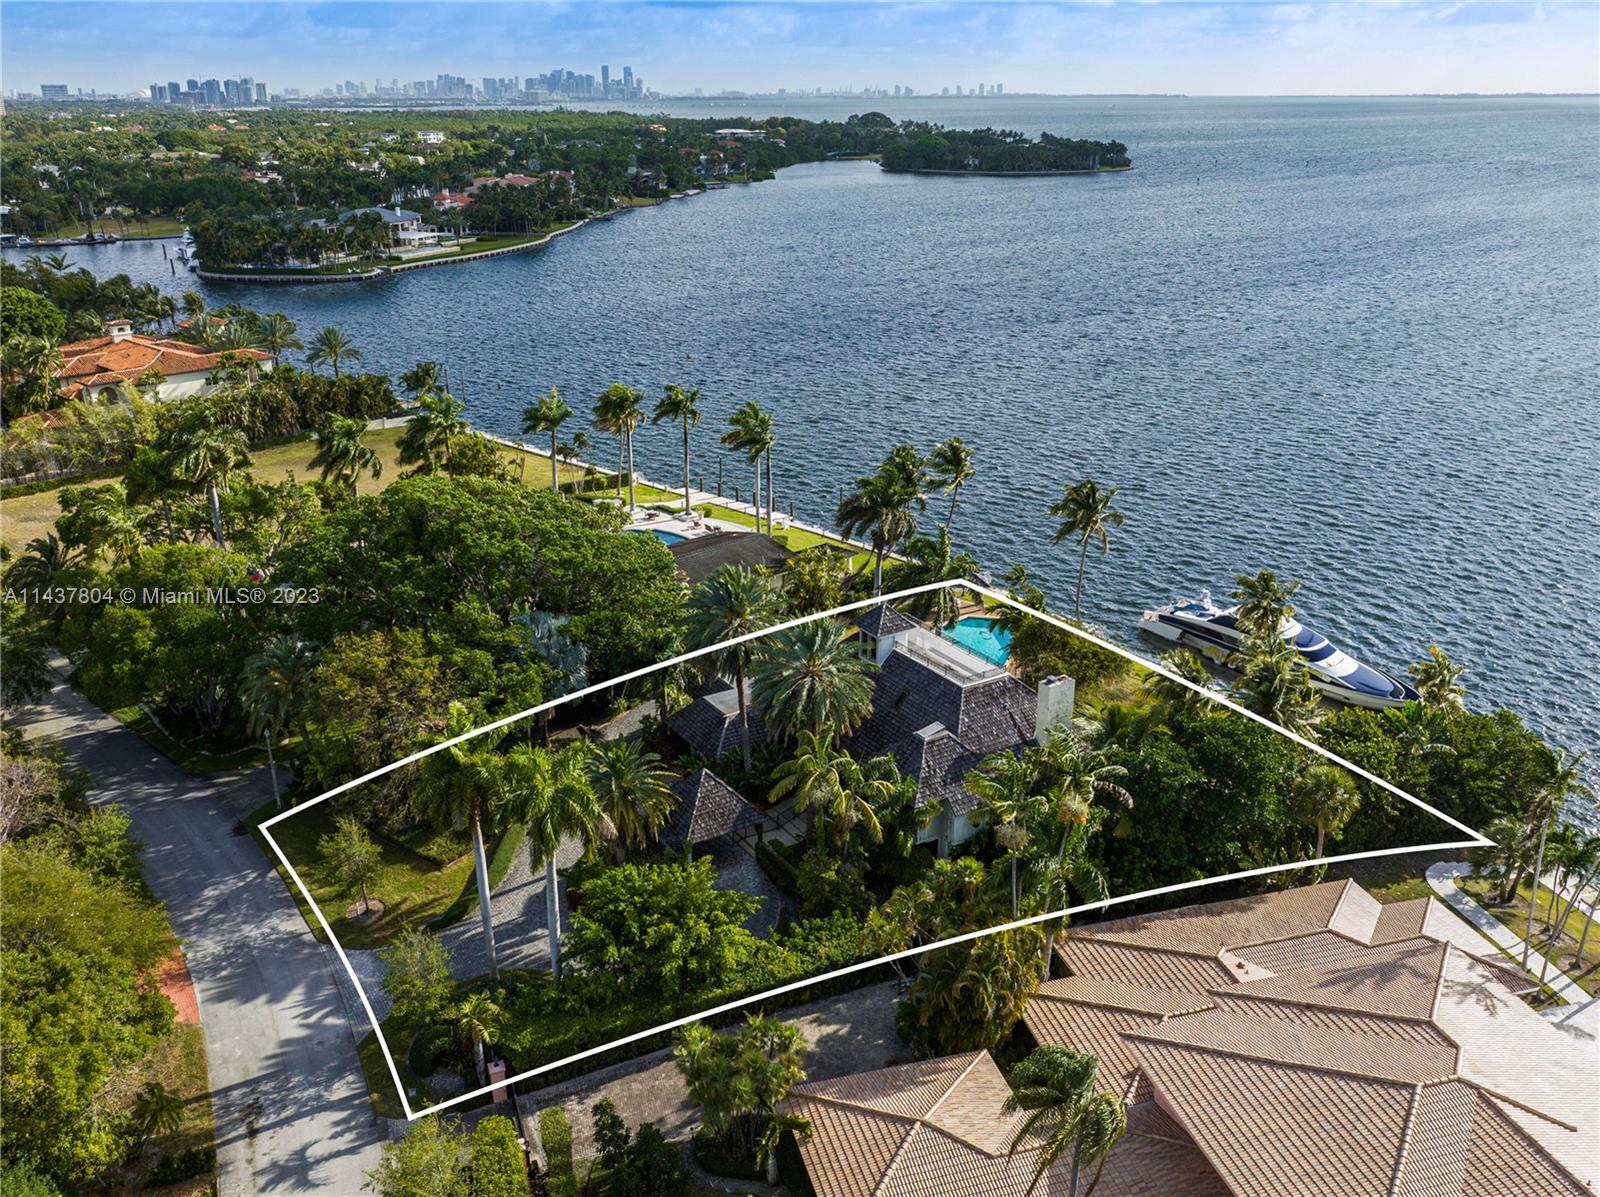 An exceptional opportunity to acquire a bayfront property in the exclusive and gated Old Cutler Bay community. Boasting sweeping views of Biscayne Bay, the expansive 31,130 SF lot features an impressive 170 feet of waterfront. Build your dream home on one of the last remaining lots available on the open bay. In close proximity to Miami's finest private and public schools, restaurants, shopping, and entertainment.